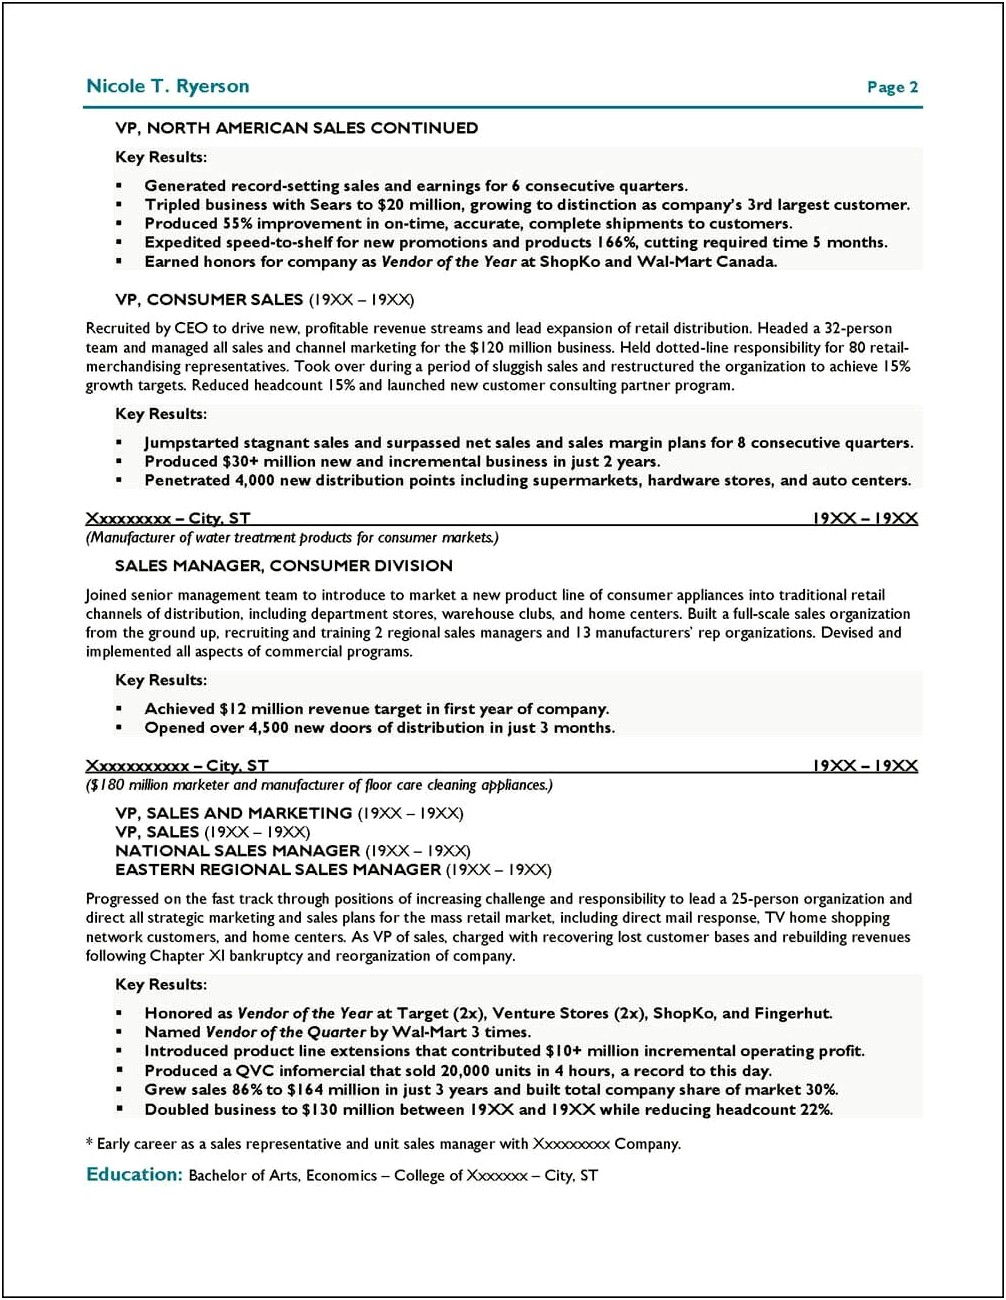 Resume Objective Statement For Finance